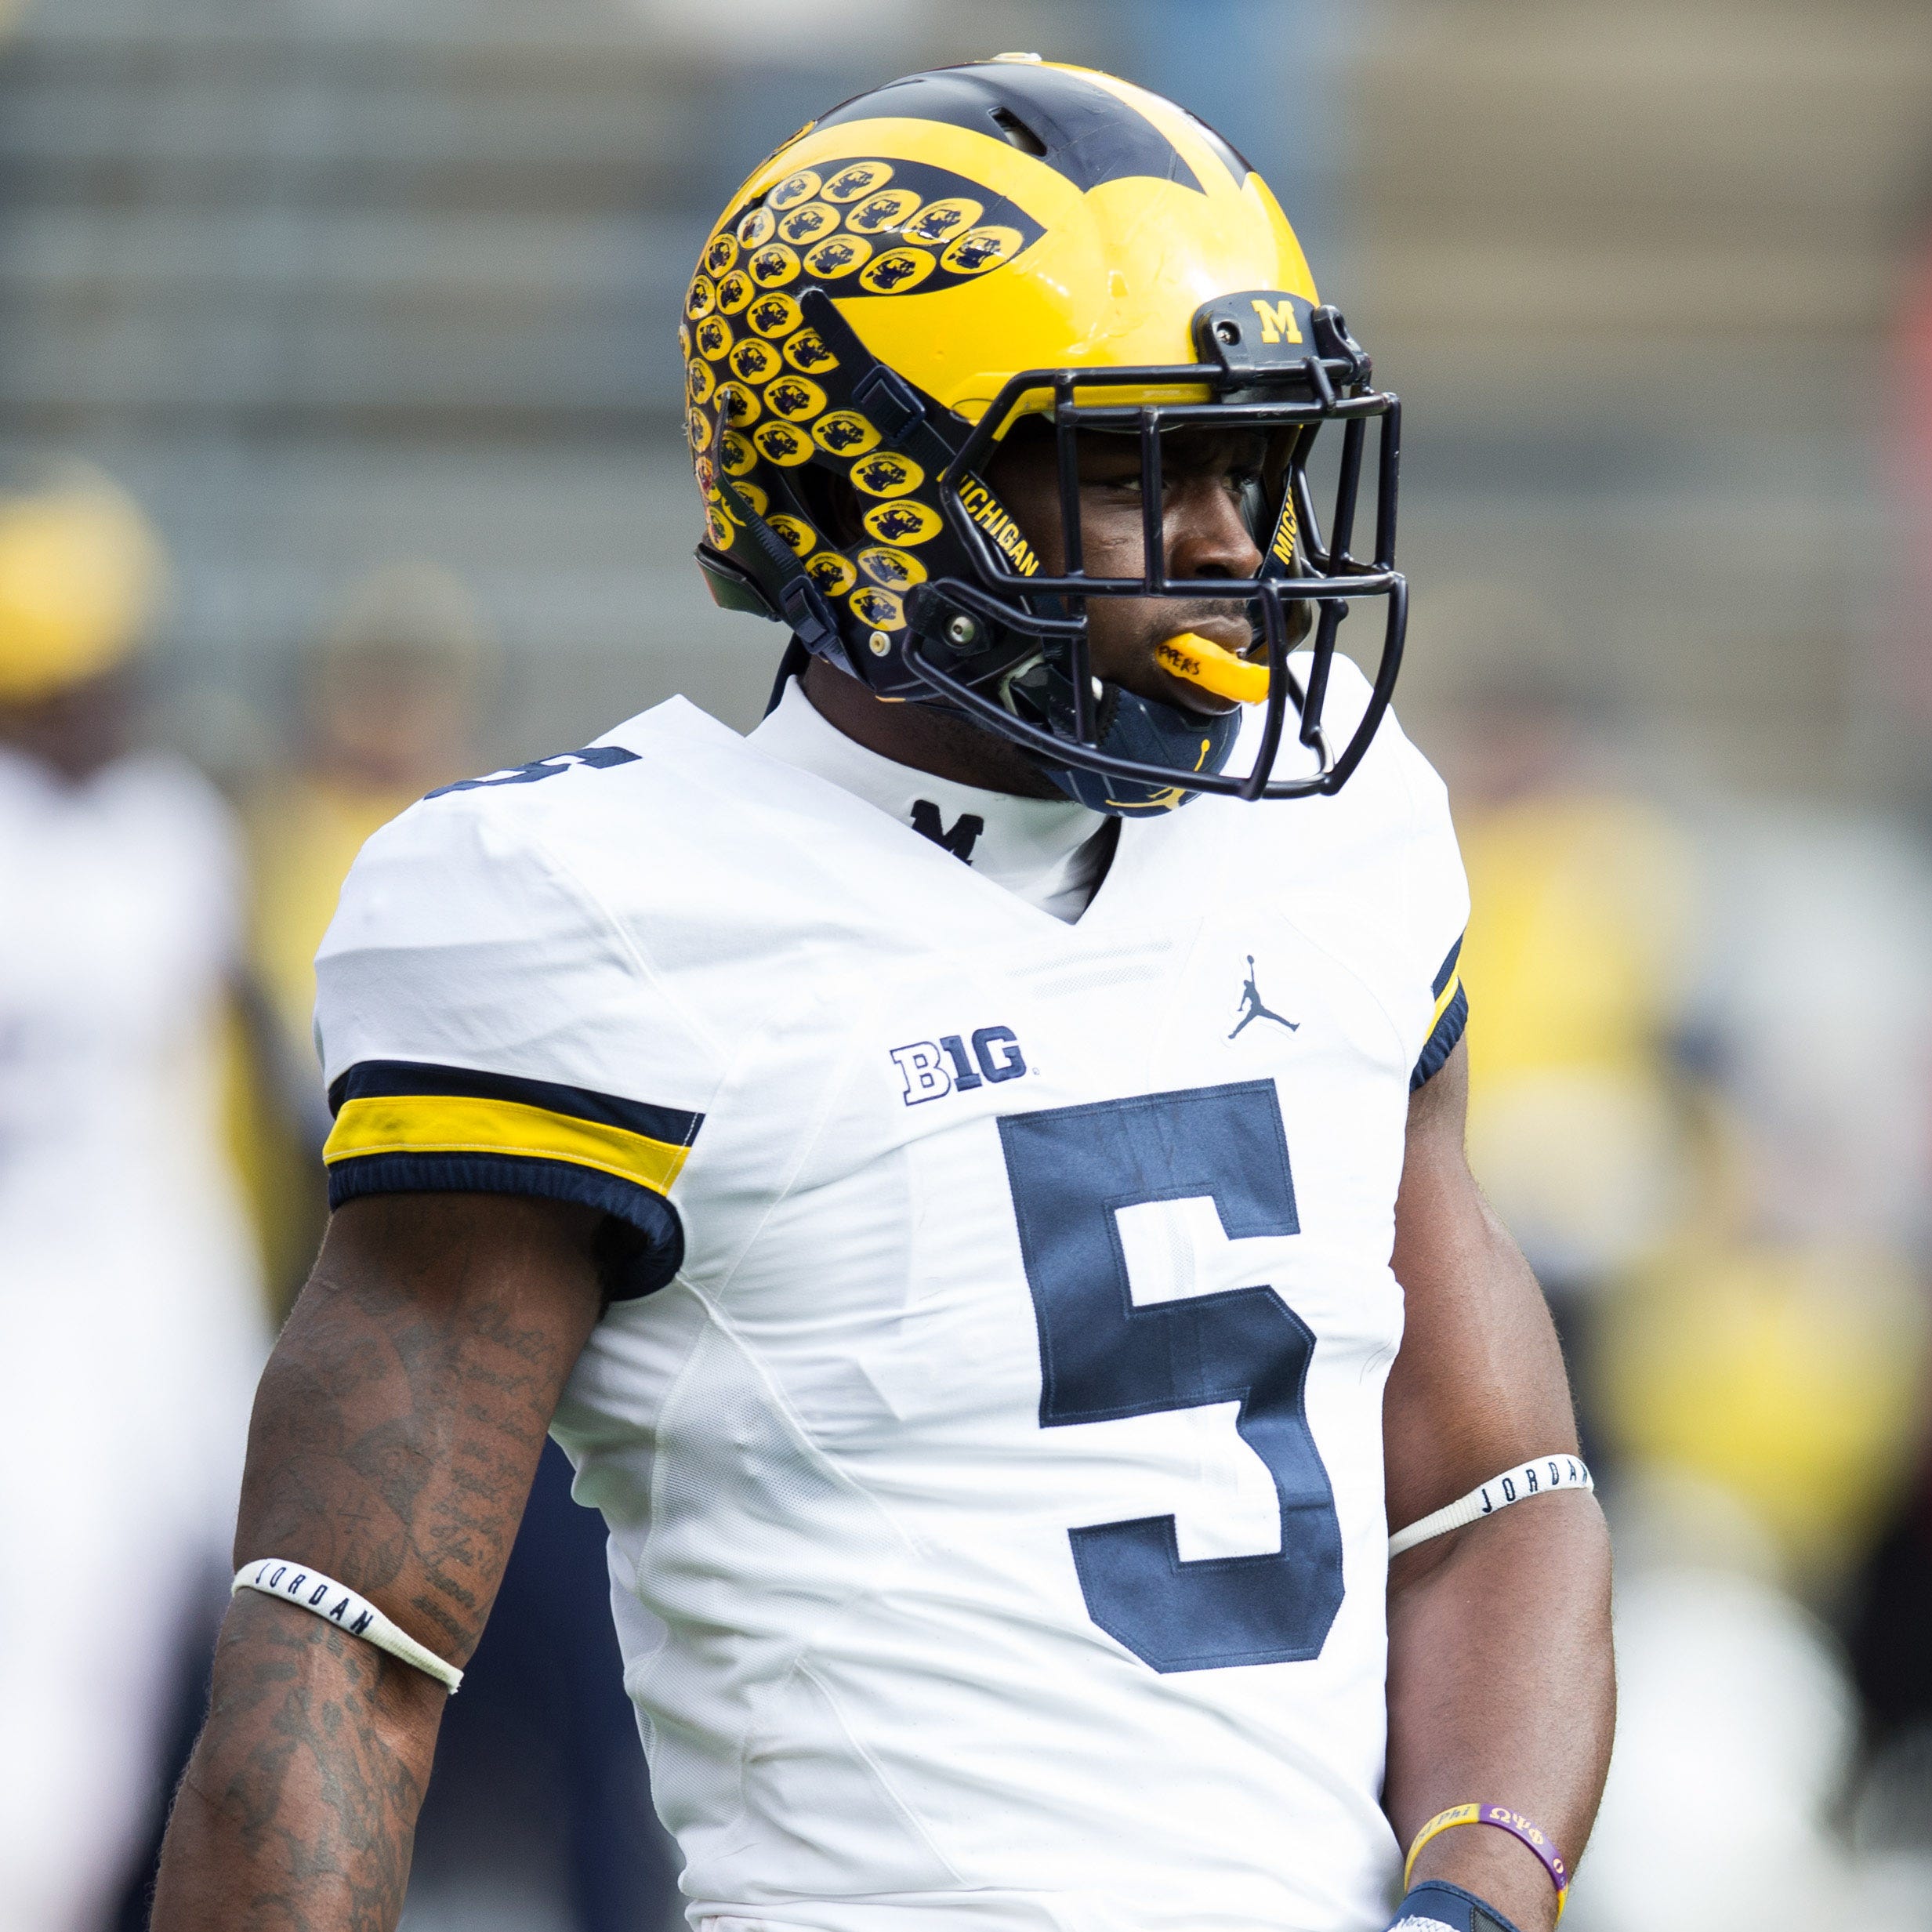 Former Michigan star Jabrill Peppers discussed former coordinator DJ Durkin during an appearance on The Rich Eisen Show.